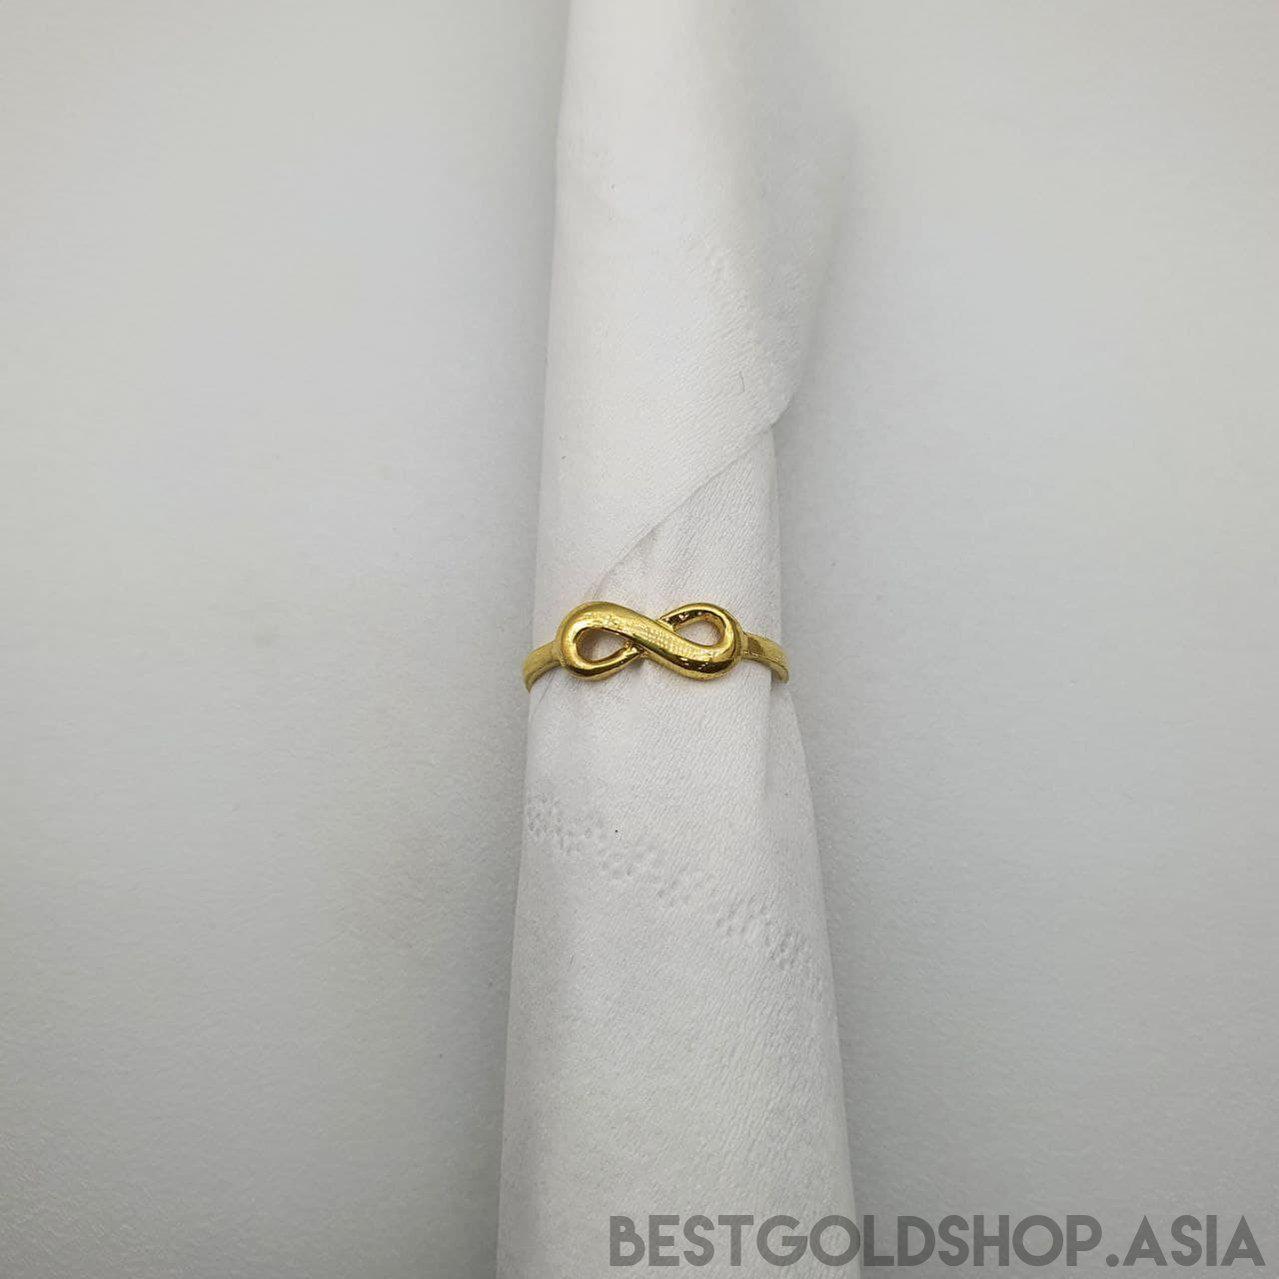 22k / 916 Gold Infinity Ring-916 gold-Best Gold Shop